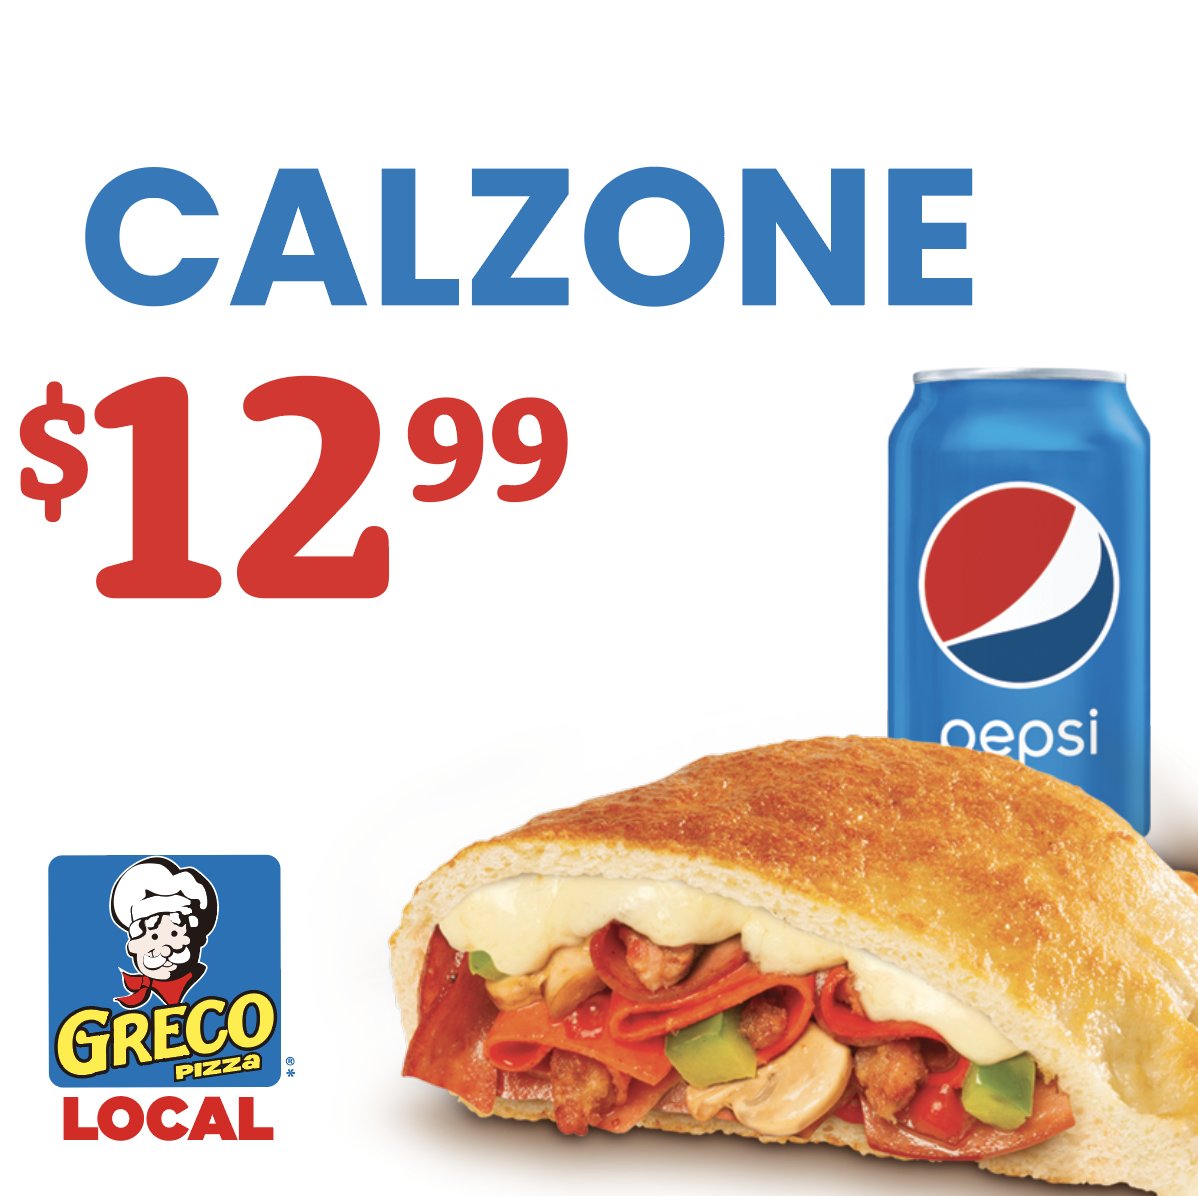 Dive into our large Calzone stuffed with your choice of irresistible fillings: Meats, Donair, Hawaiian, BBQ Chicken, or Pepperoni Duo, all for just $12.99!!
#CalzoneCombo #PopAndCalzone #OrderOnline #OnlineMenu #HawaiianCalzone #CalzoneCravings #FeedYourHunger